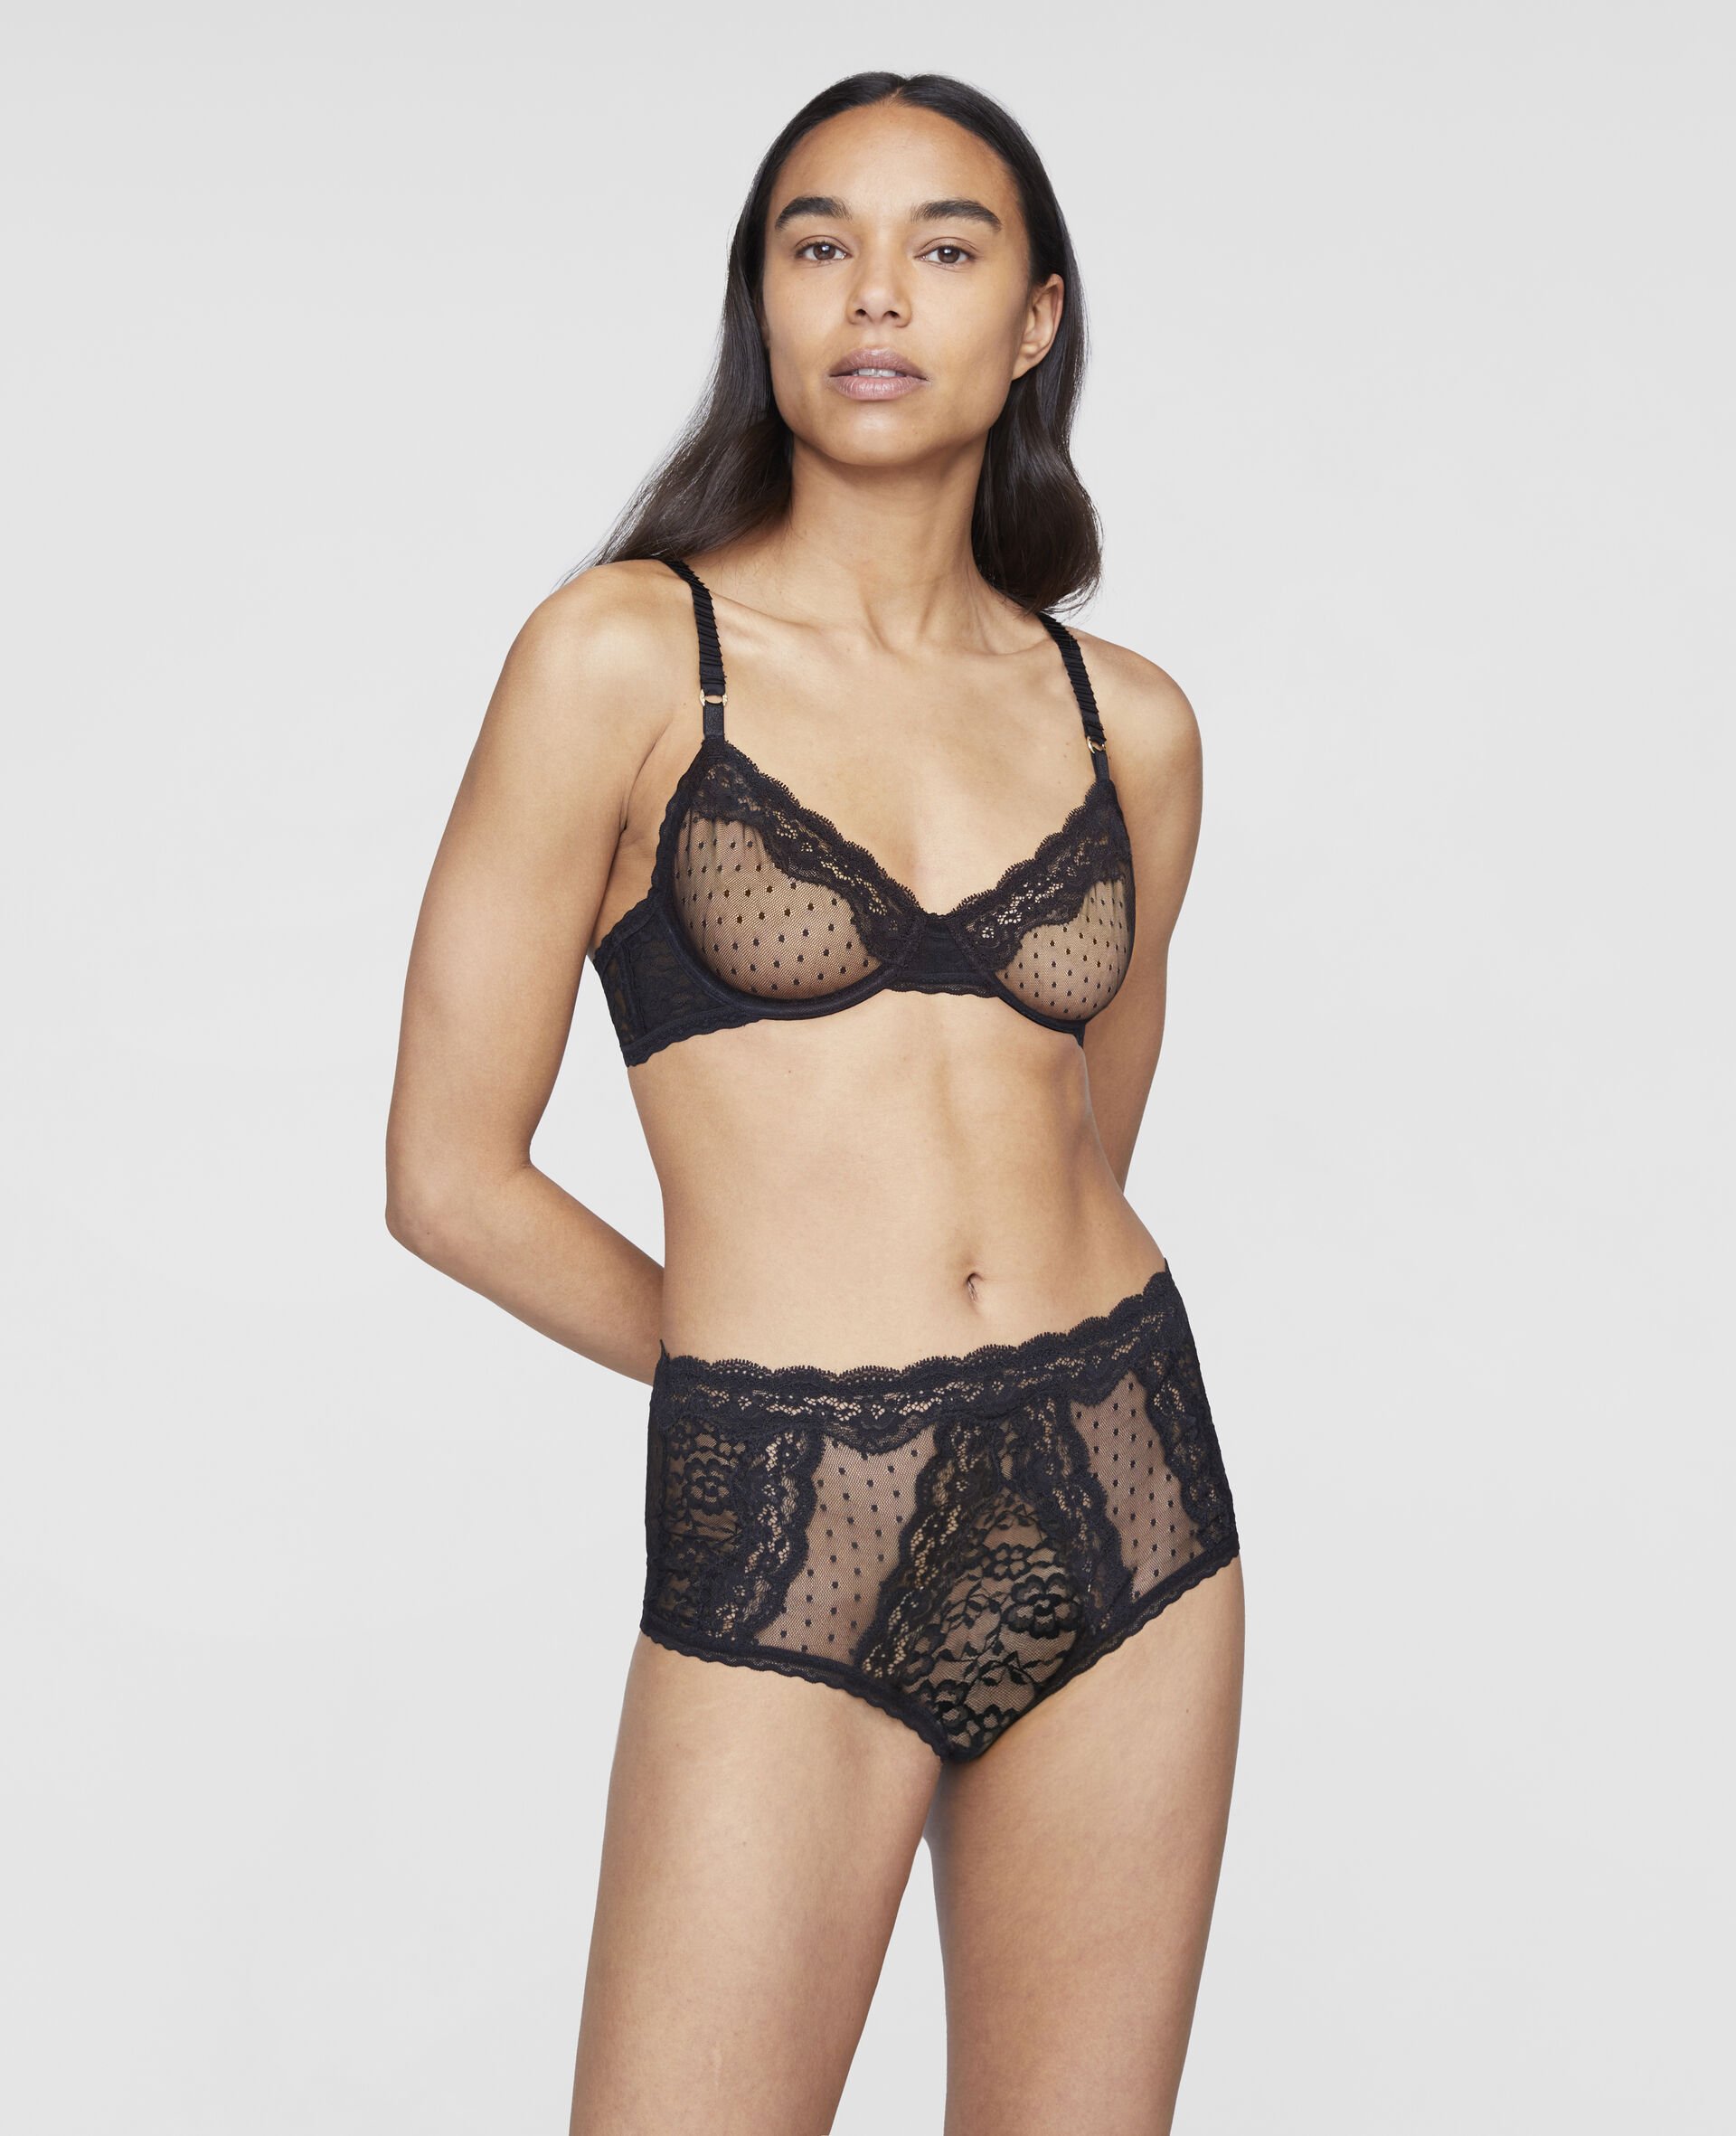 Go Green with These 8 Sustainable & Ethical Lingerie Brands